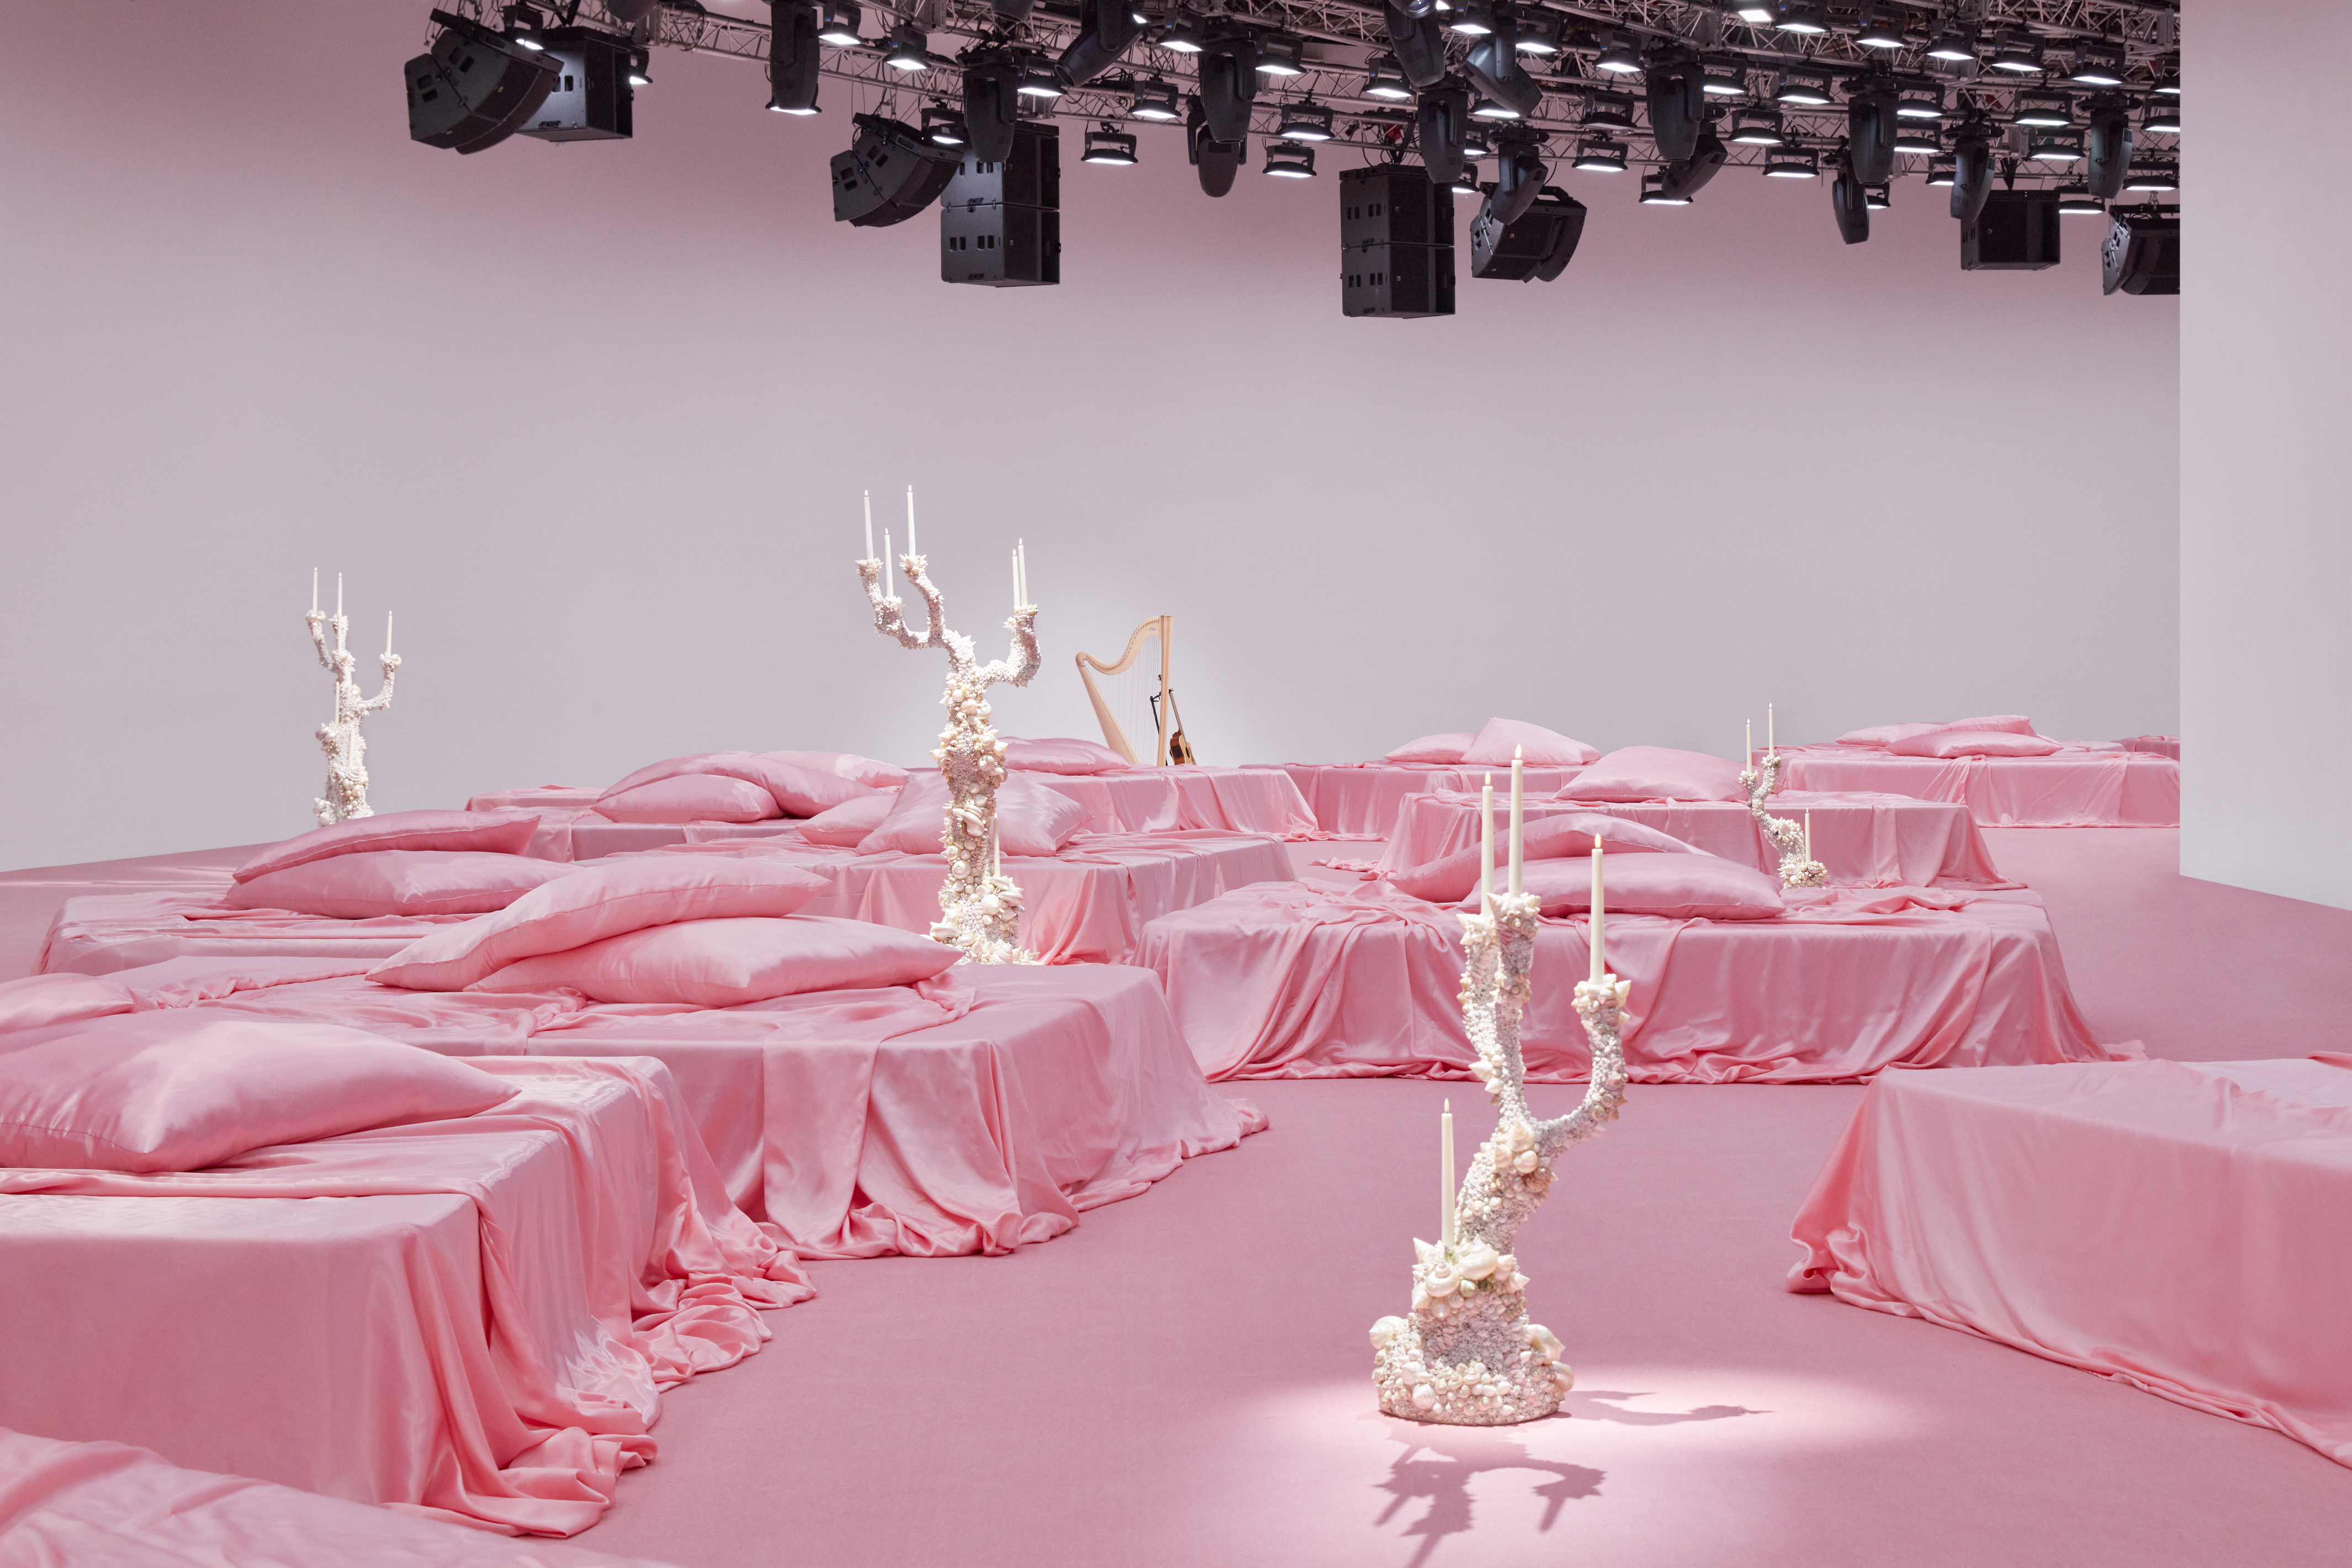 Acne Studios celebrate 10 years in Paris with a pink wedding